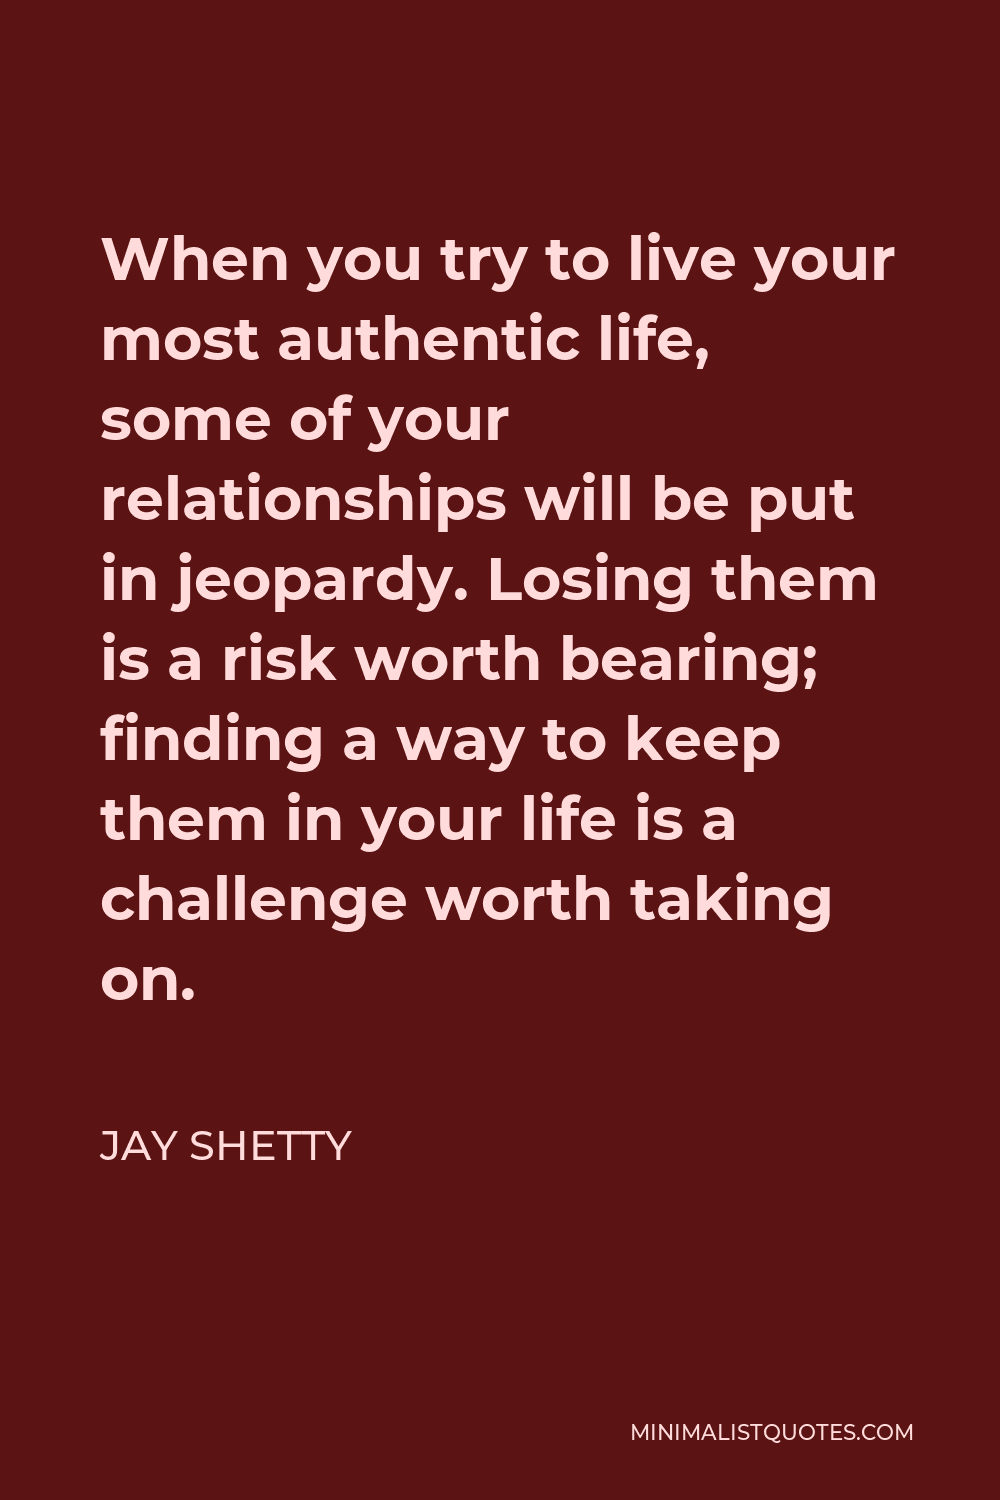 Jay Shetty Quote - When you try to live your most authentic life, some of your relationships will be put in jeopardy. Losing them is a risk worth bearing; finding a way to keep them in your life is a challenge worth taking on.